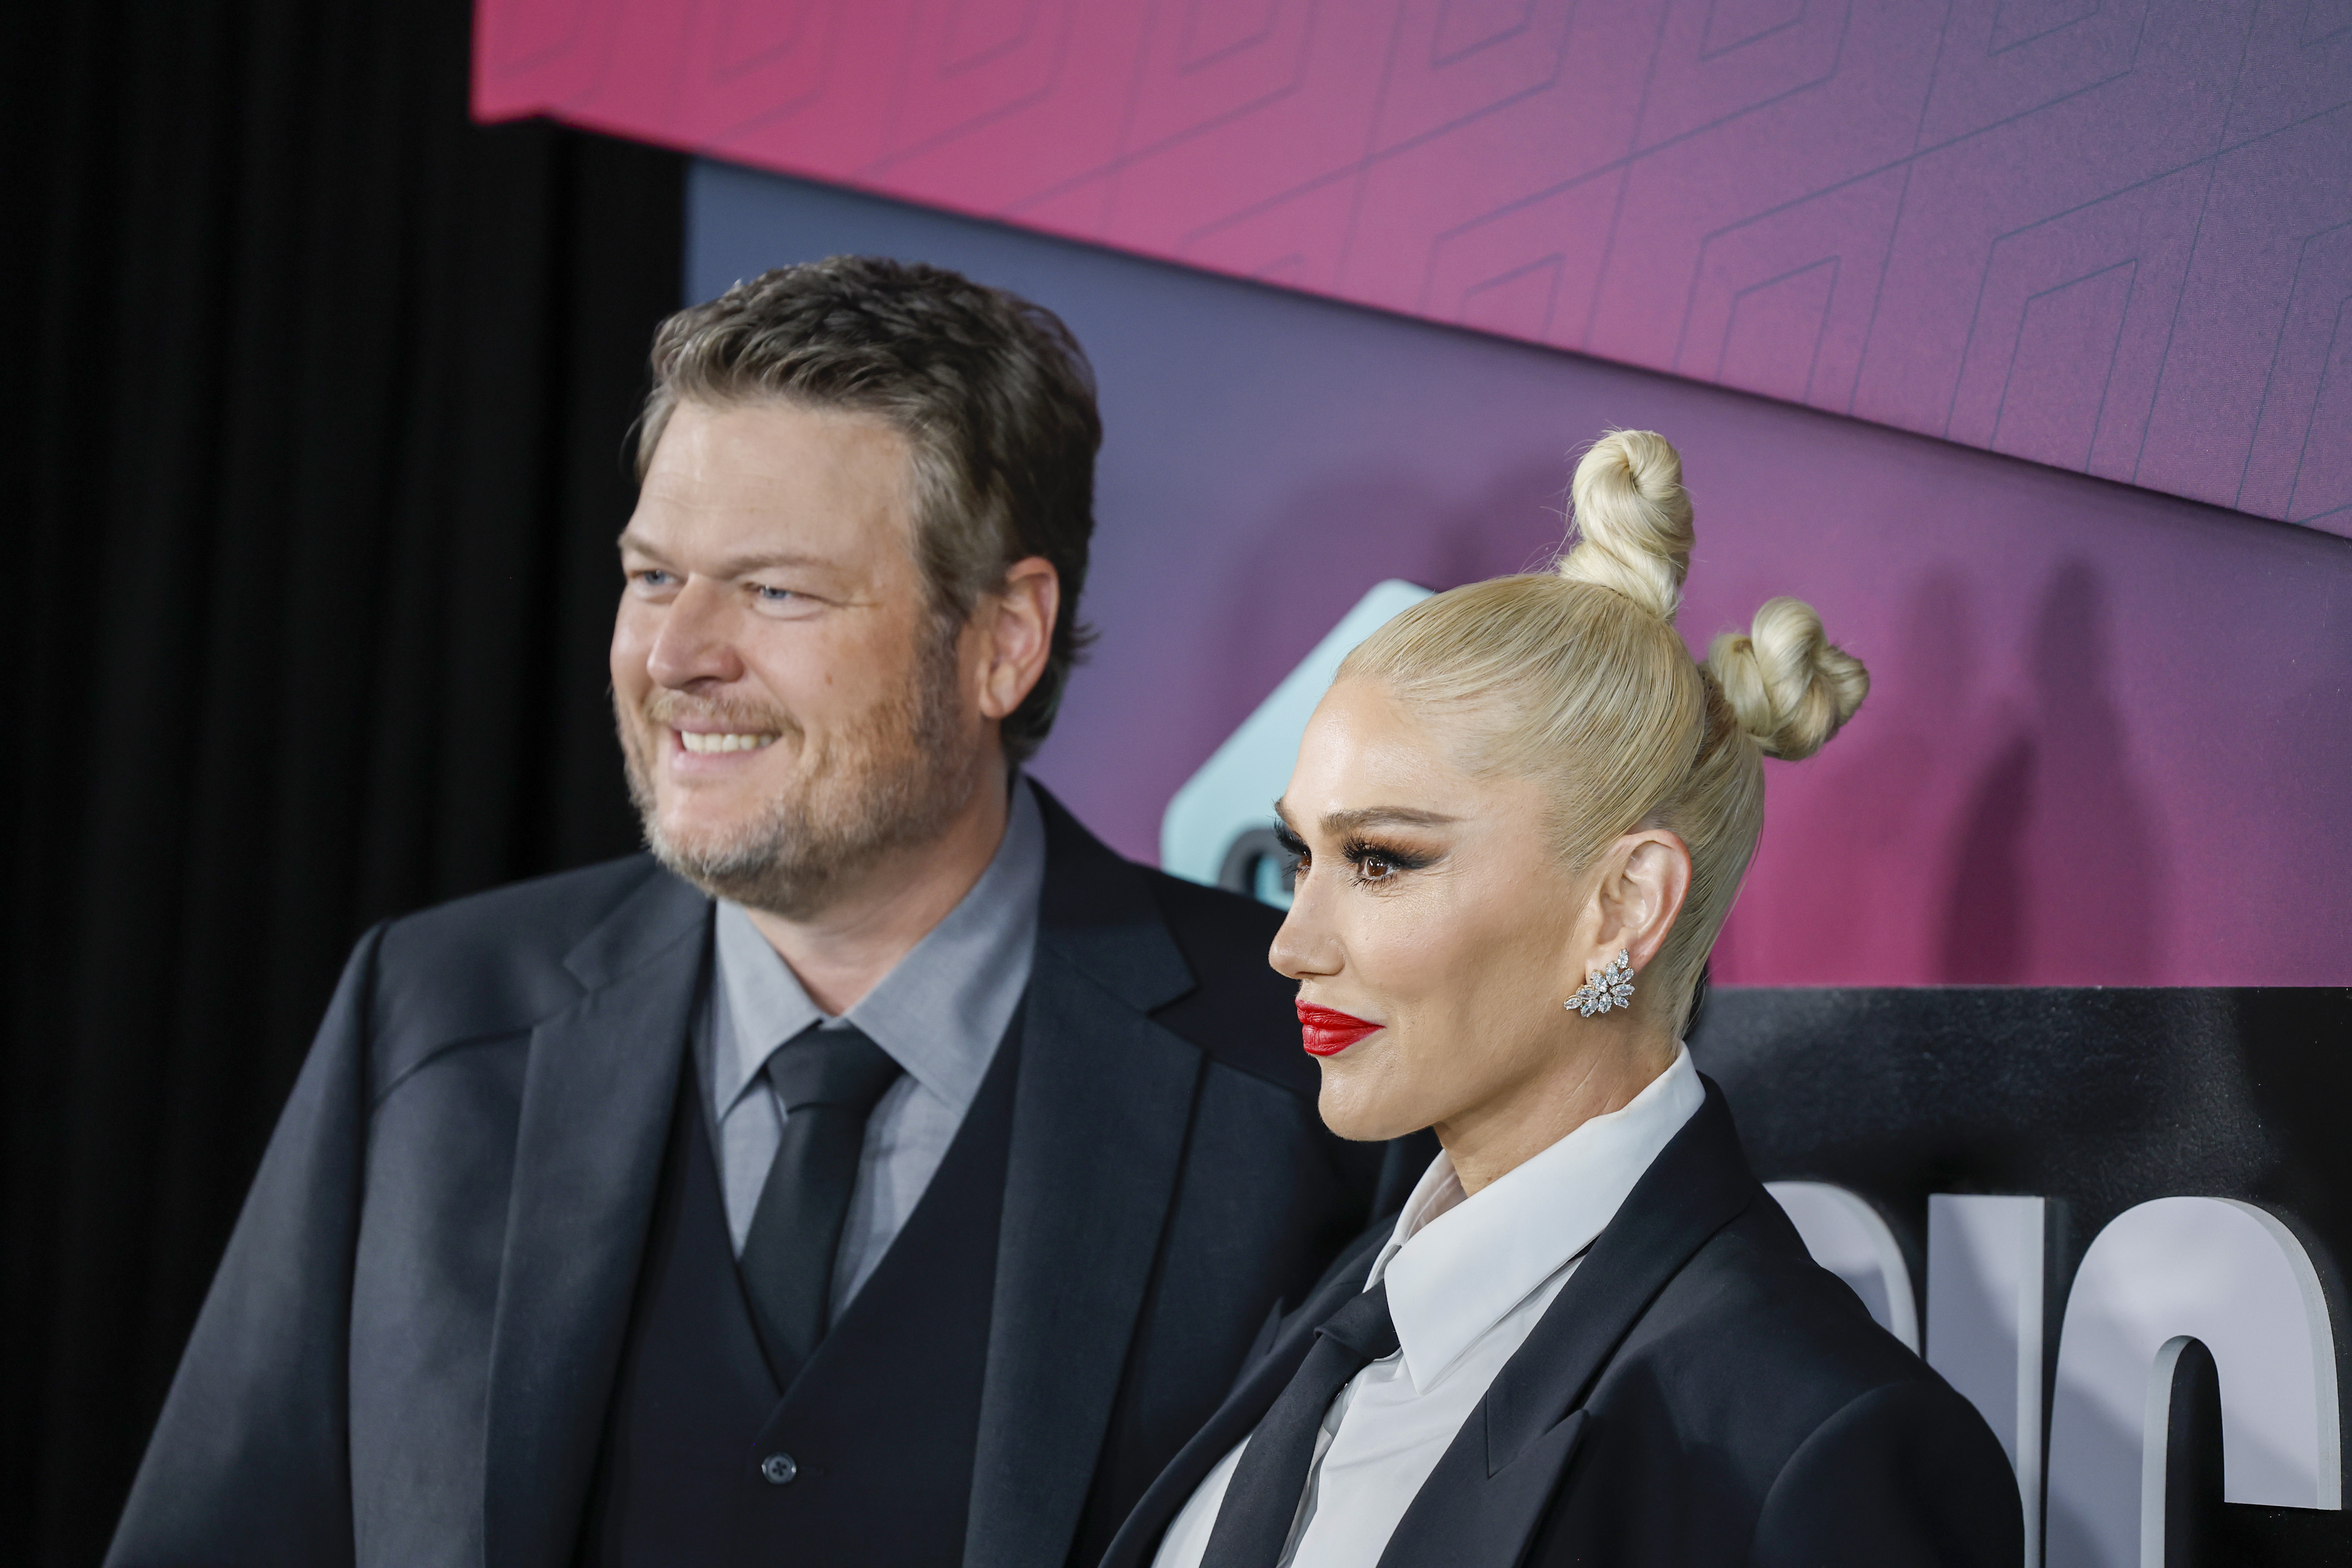 Blake Shelton and Gwen Stefani attend the 2023 CMT Music Awards in Austin, Texas on April 2, 2023. | Source: Getty Images